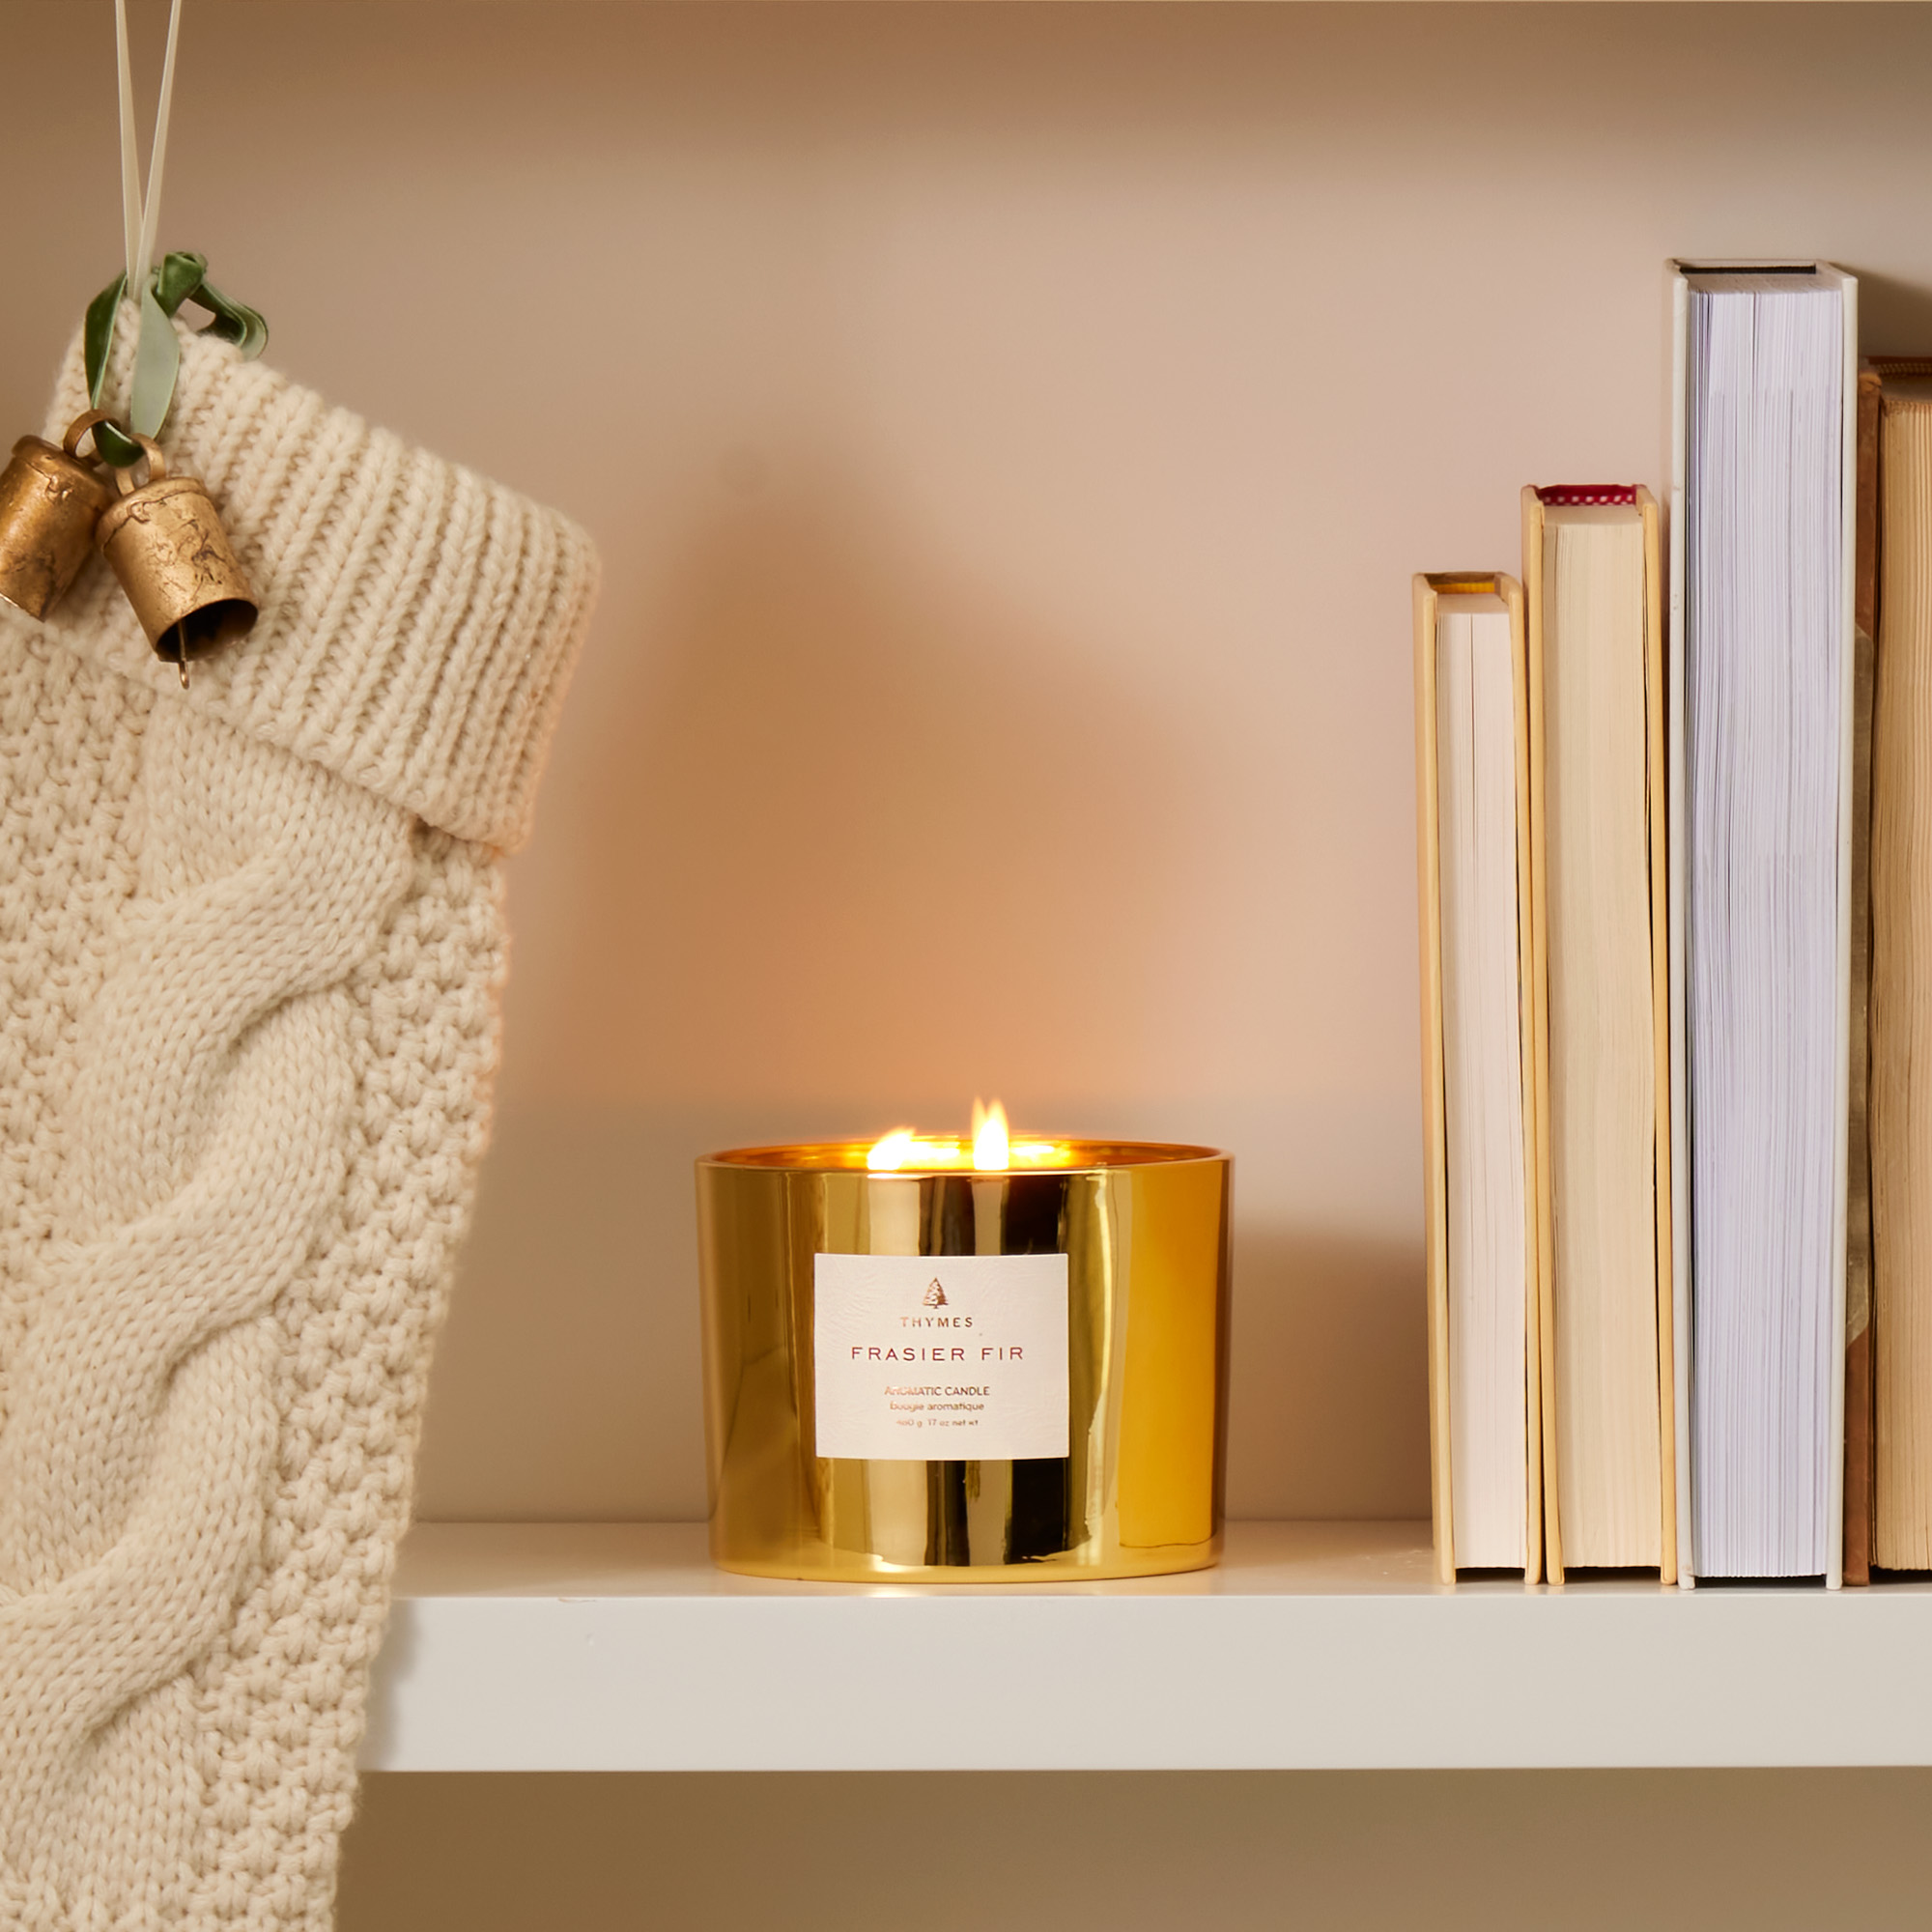 Thymes Candles